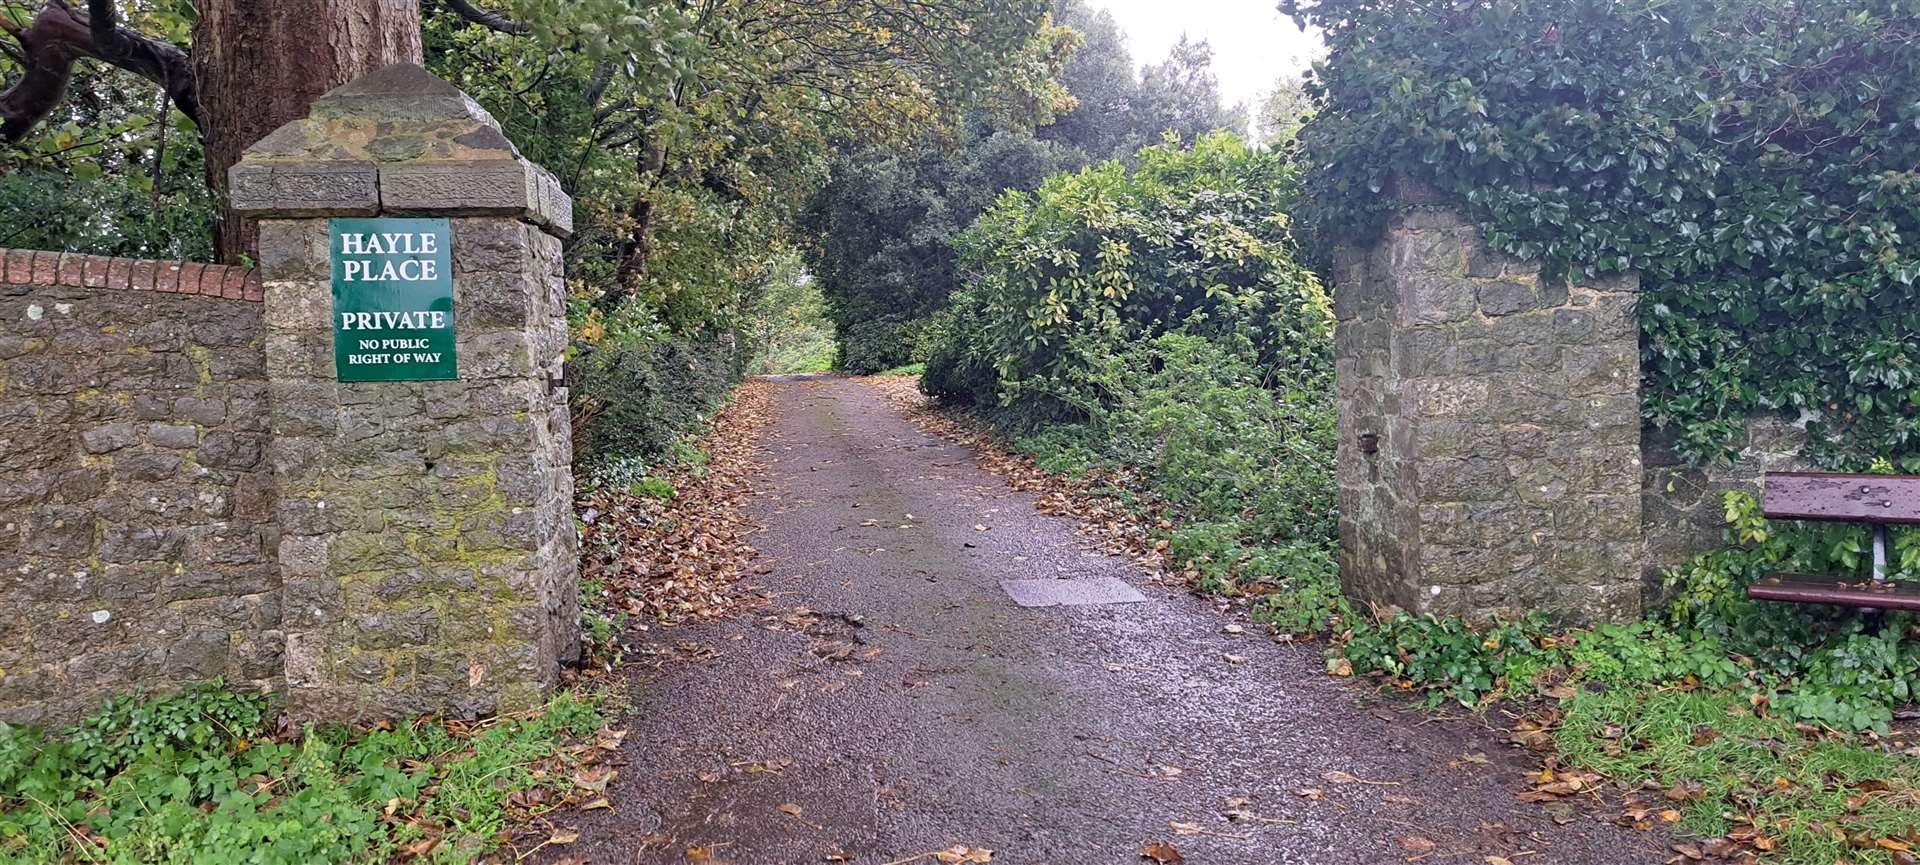 The entrance to Hayle Place off Teasaucer Hill